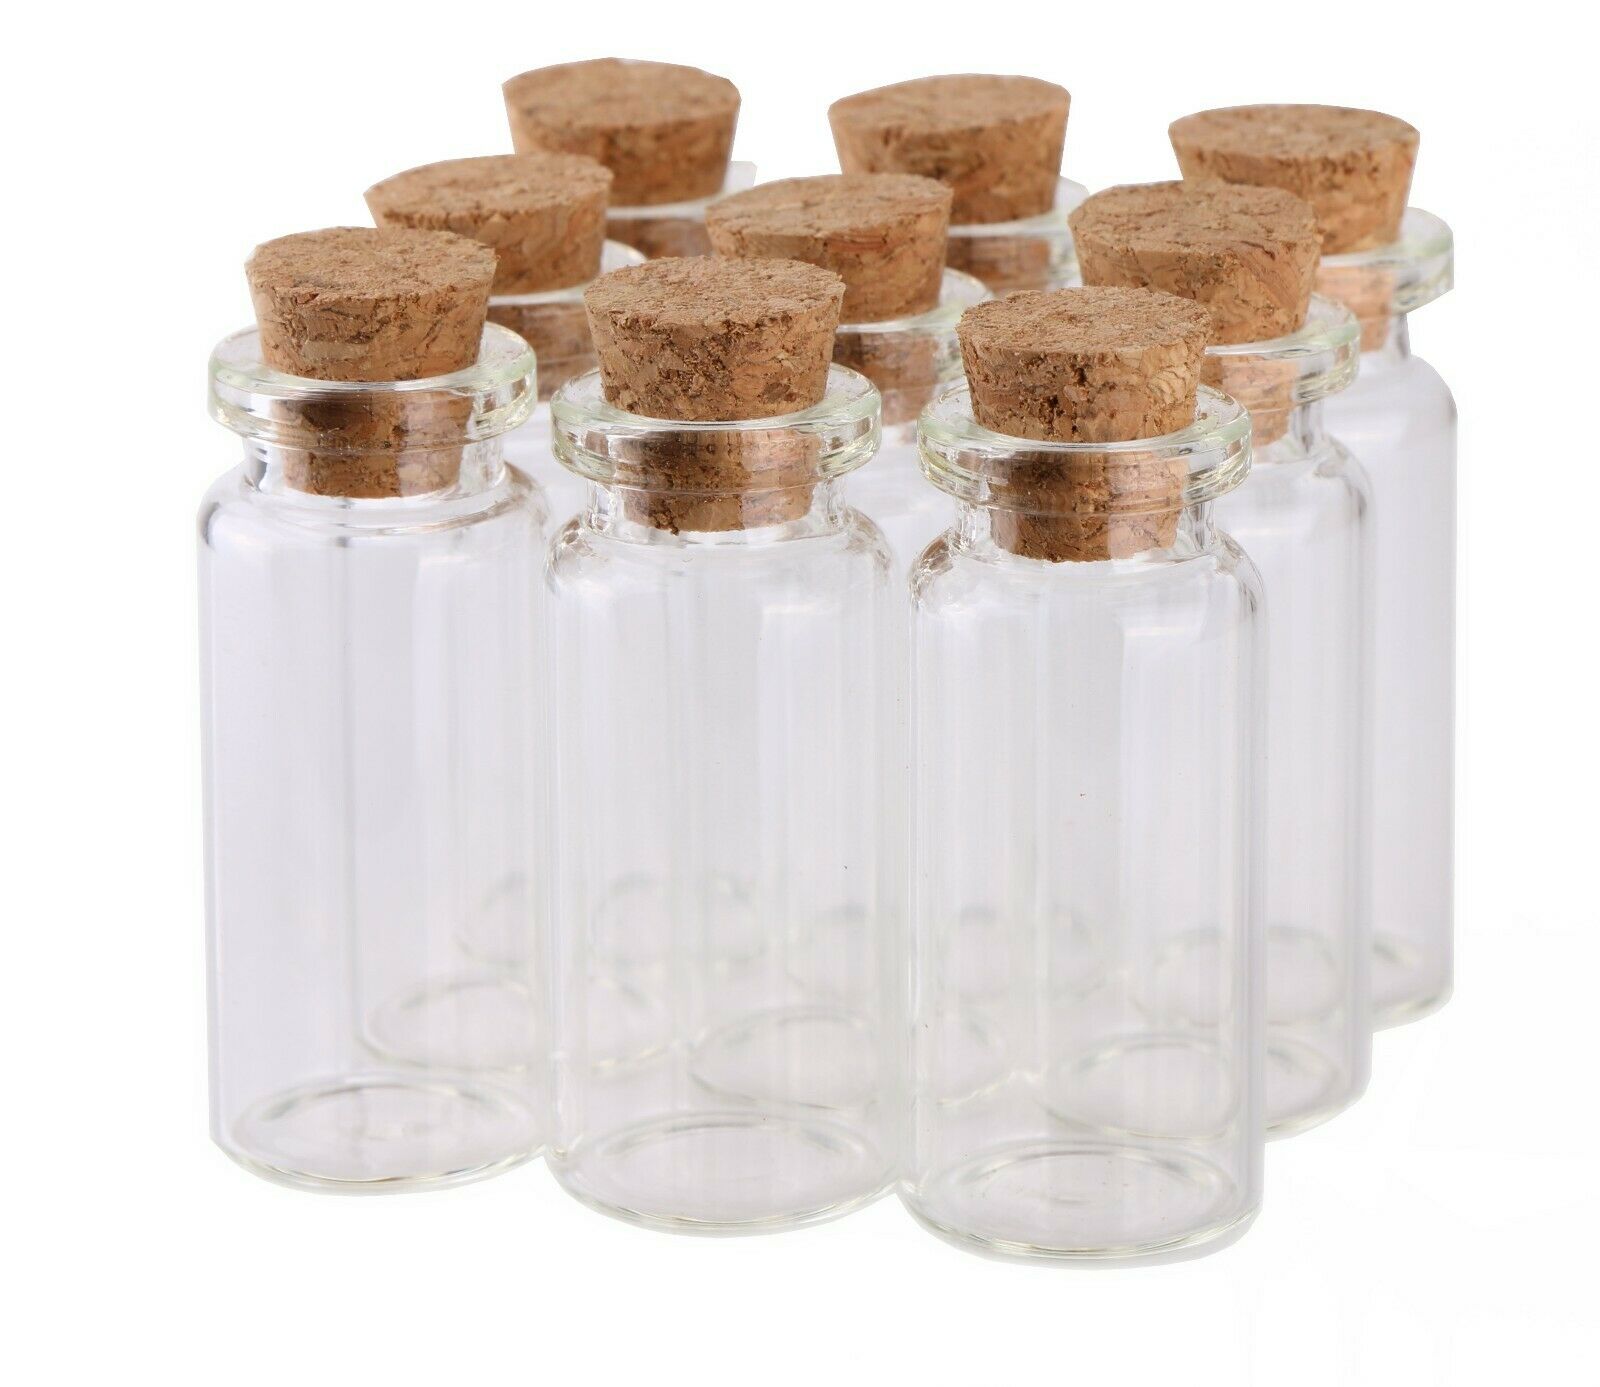 100 10ml Small Mini Glass Bottles With Cork Stopper Tiny Vials For Art Crafts